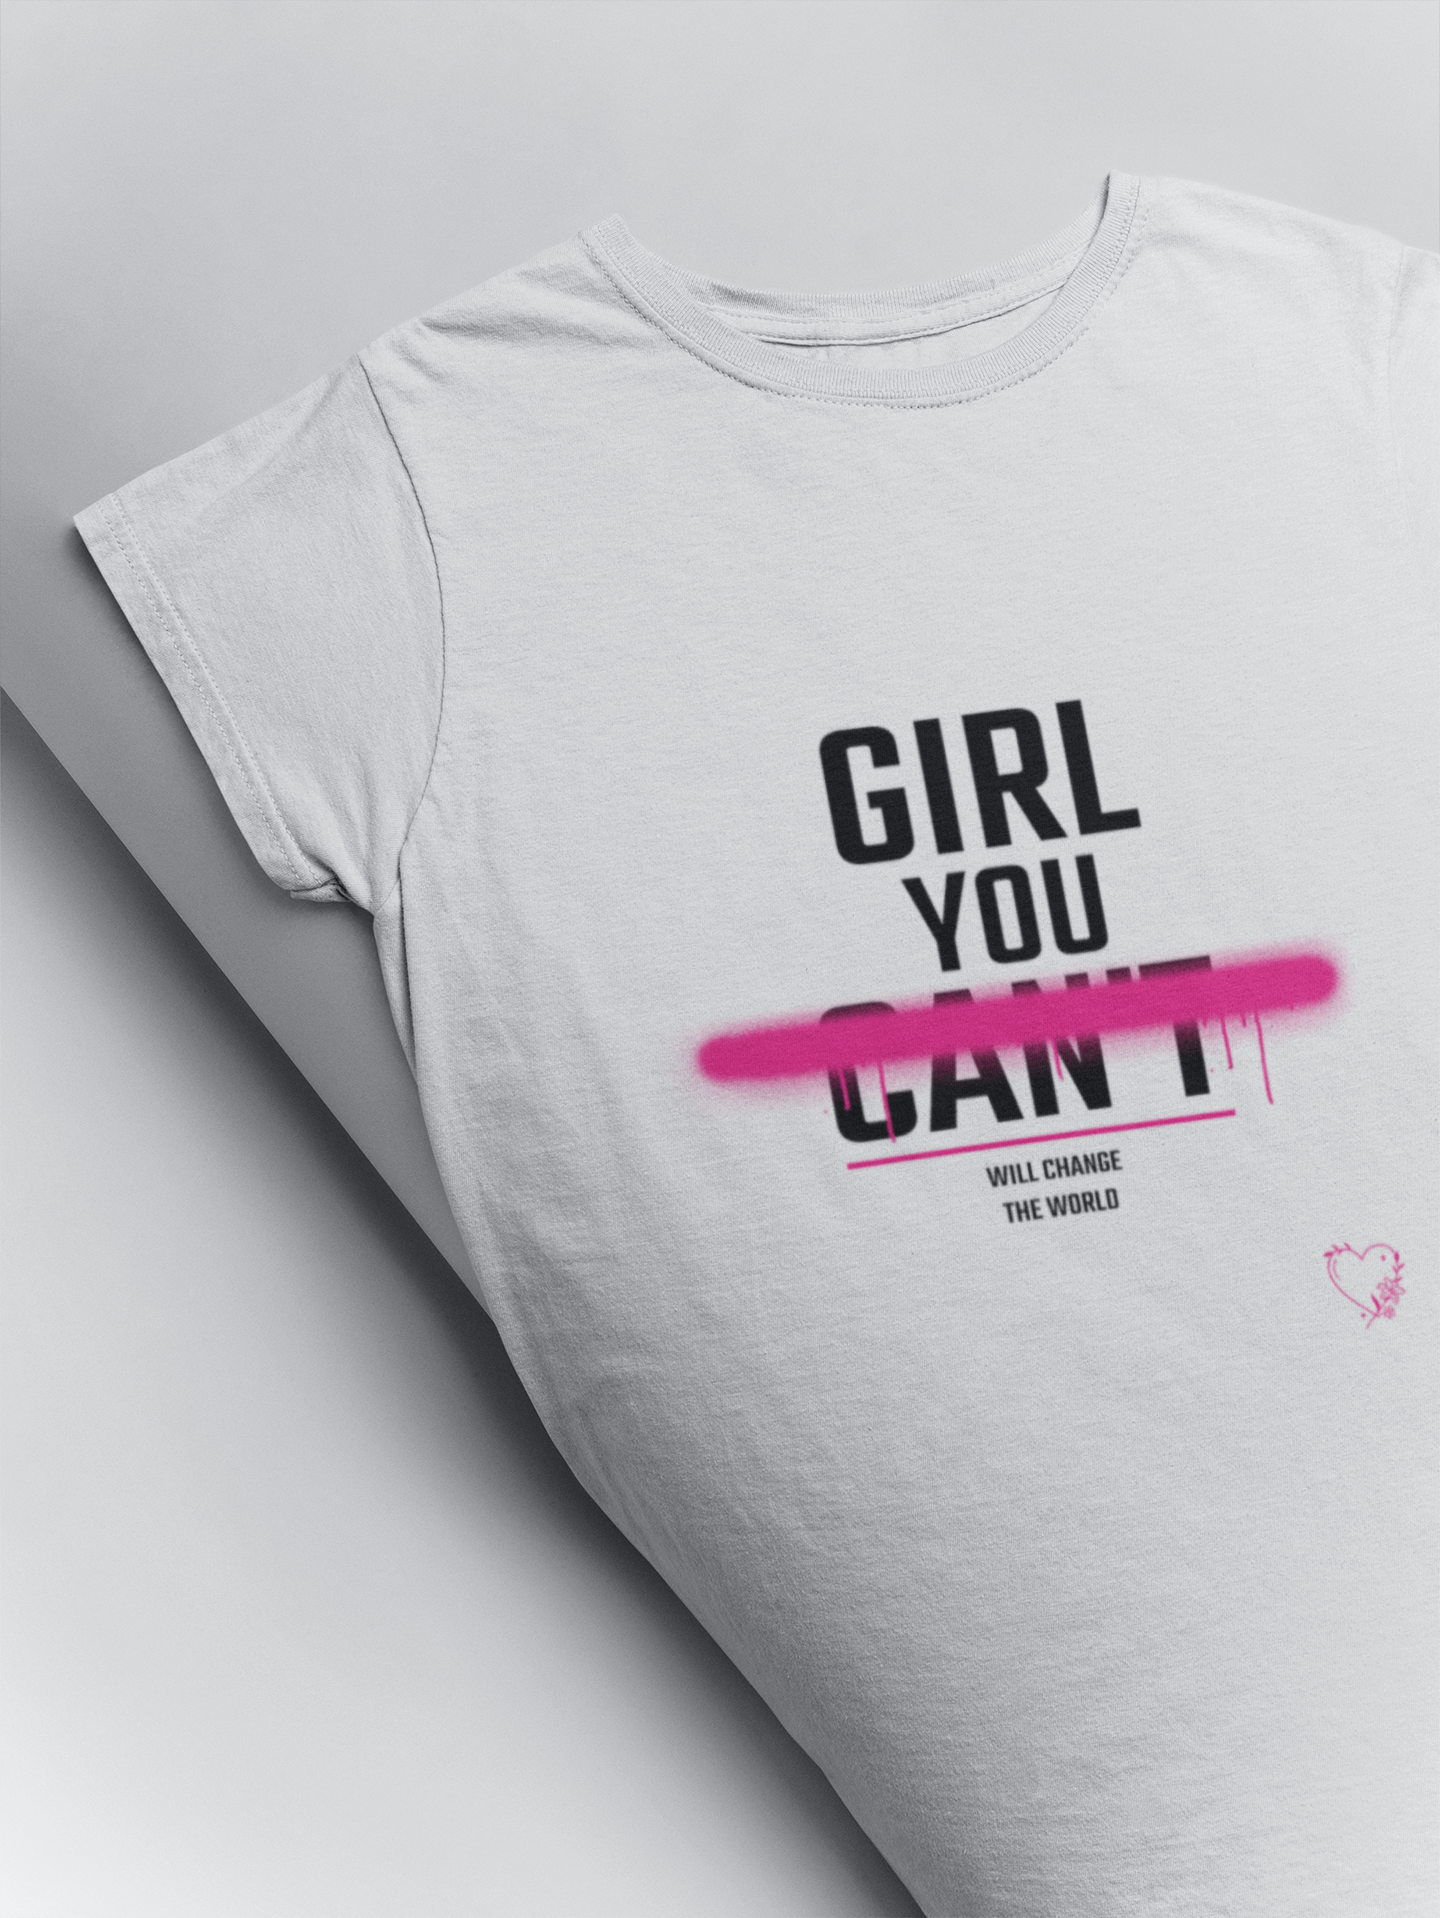 Girl you will change the world beautiful illustration printed t shirt for feminists in white colour at Muselot